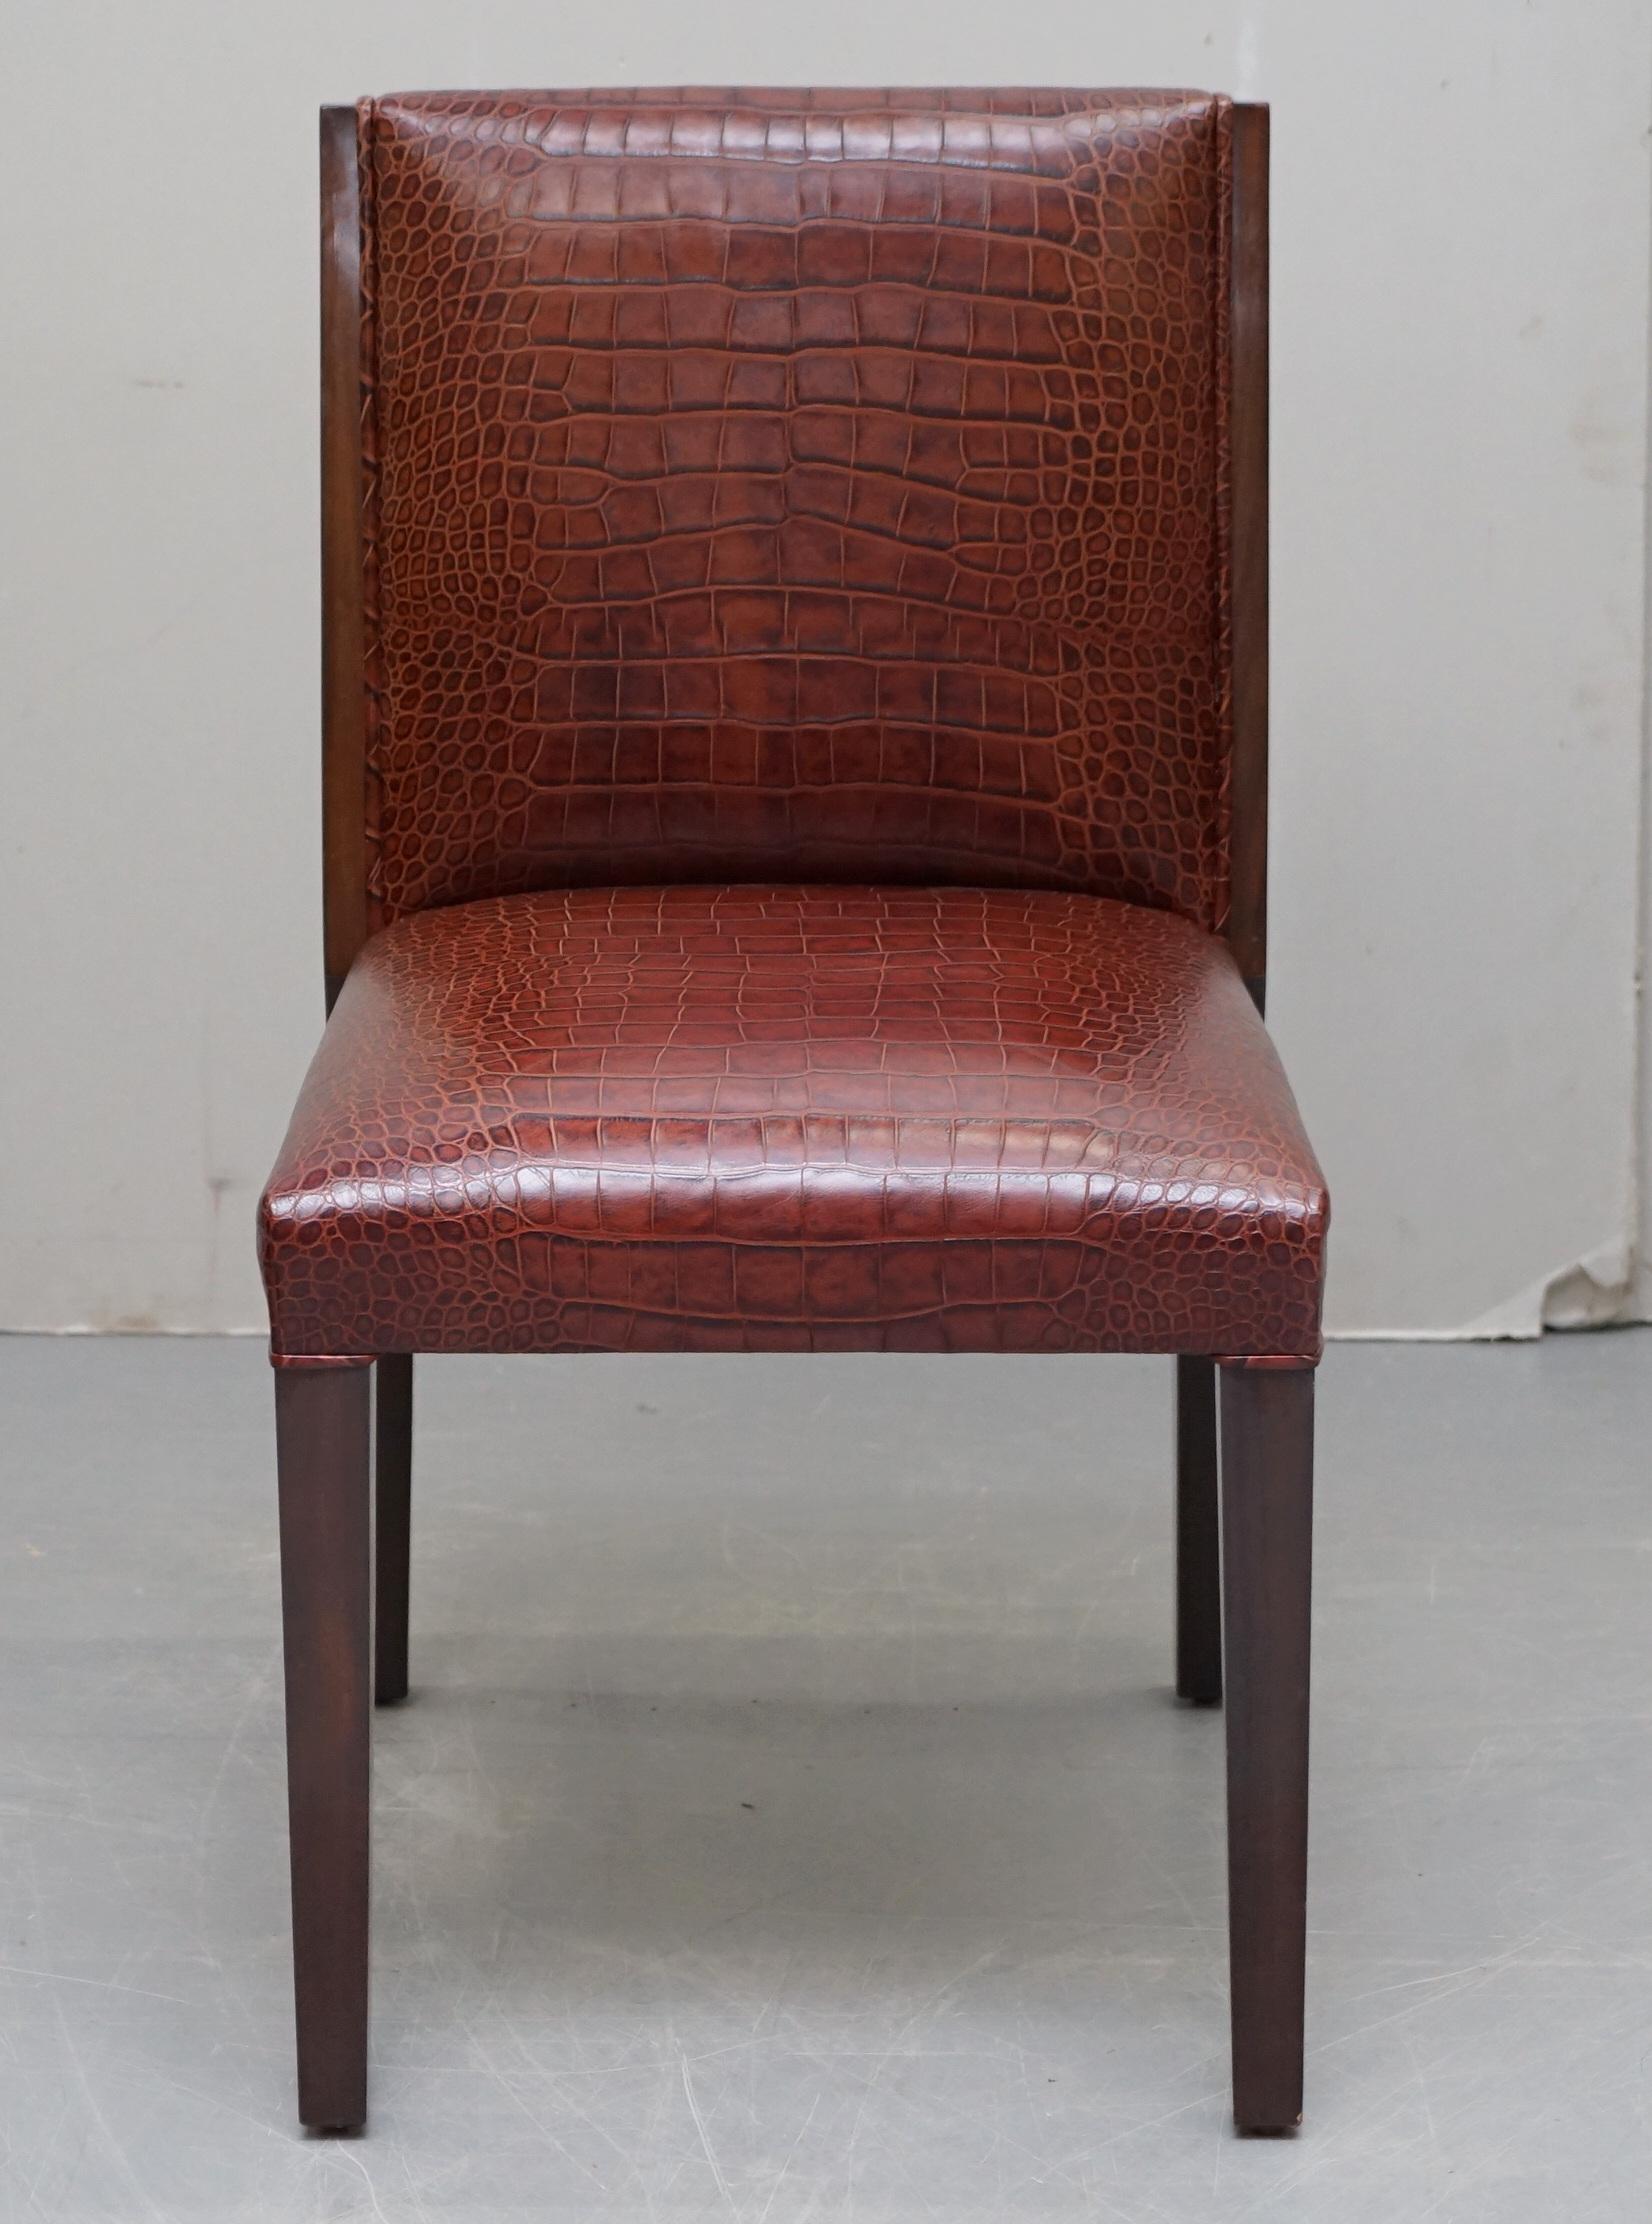 We are delighted to offer for sale this lovely contemporary Ralph Lauren Crocodile patina brown leather desk office chair

A very well made designer chair, designed to be used as a desk office chair, it has a very nice crocodile embossed patina